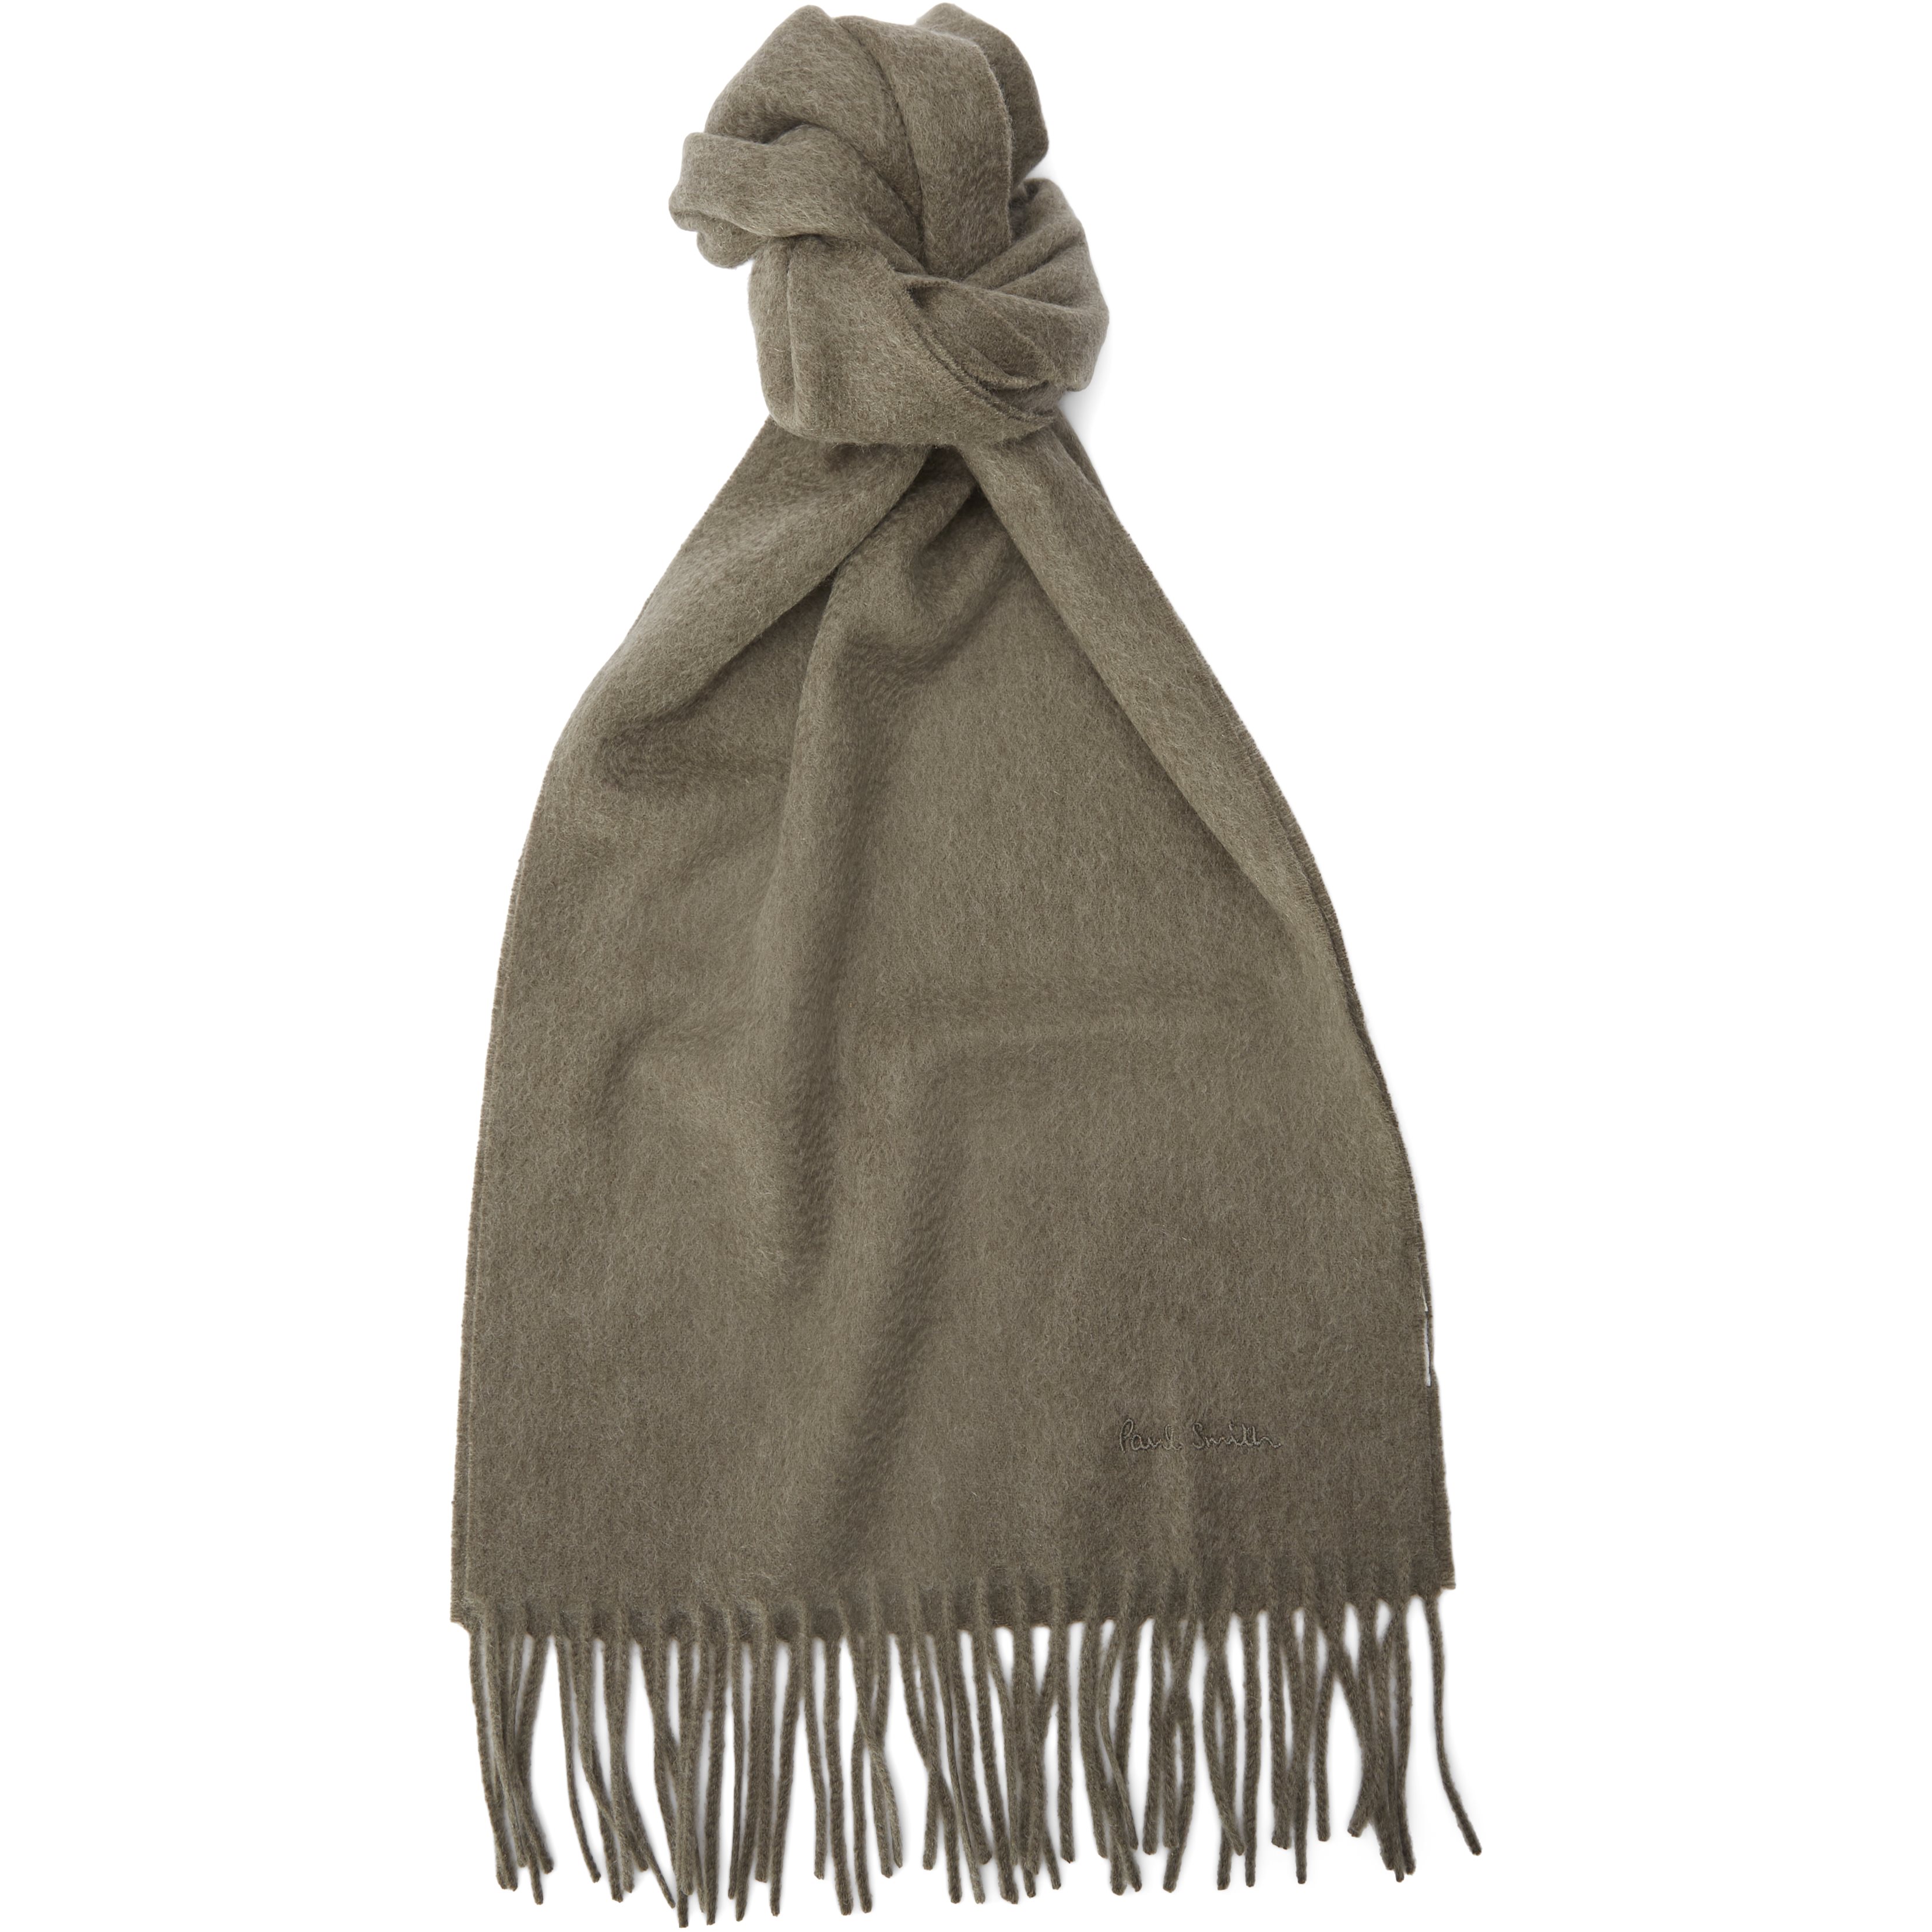 Paul Smith Accessories Scarves 119F AS09 CASHMERE Sand